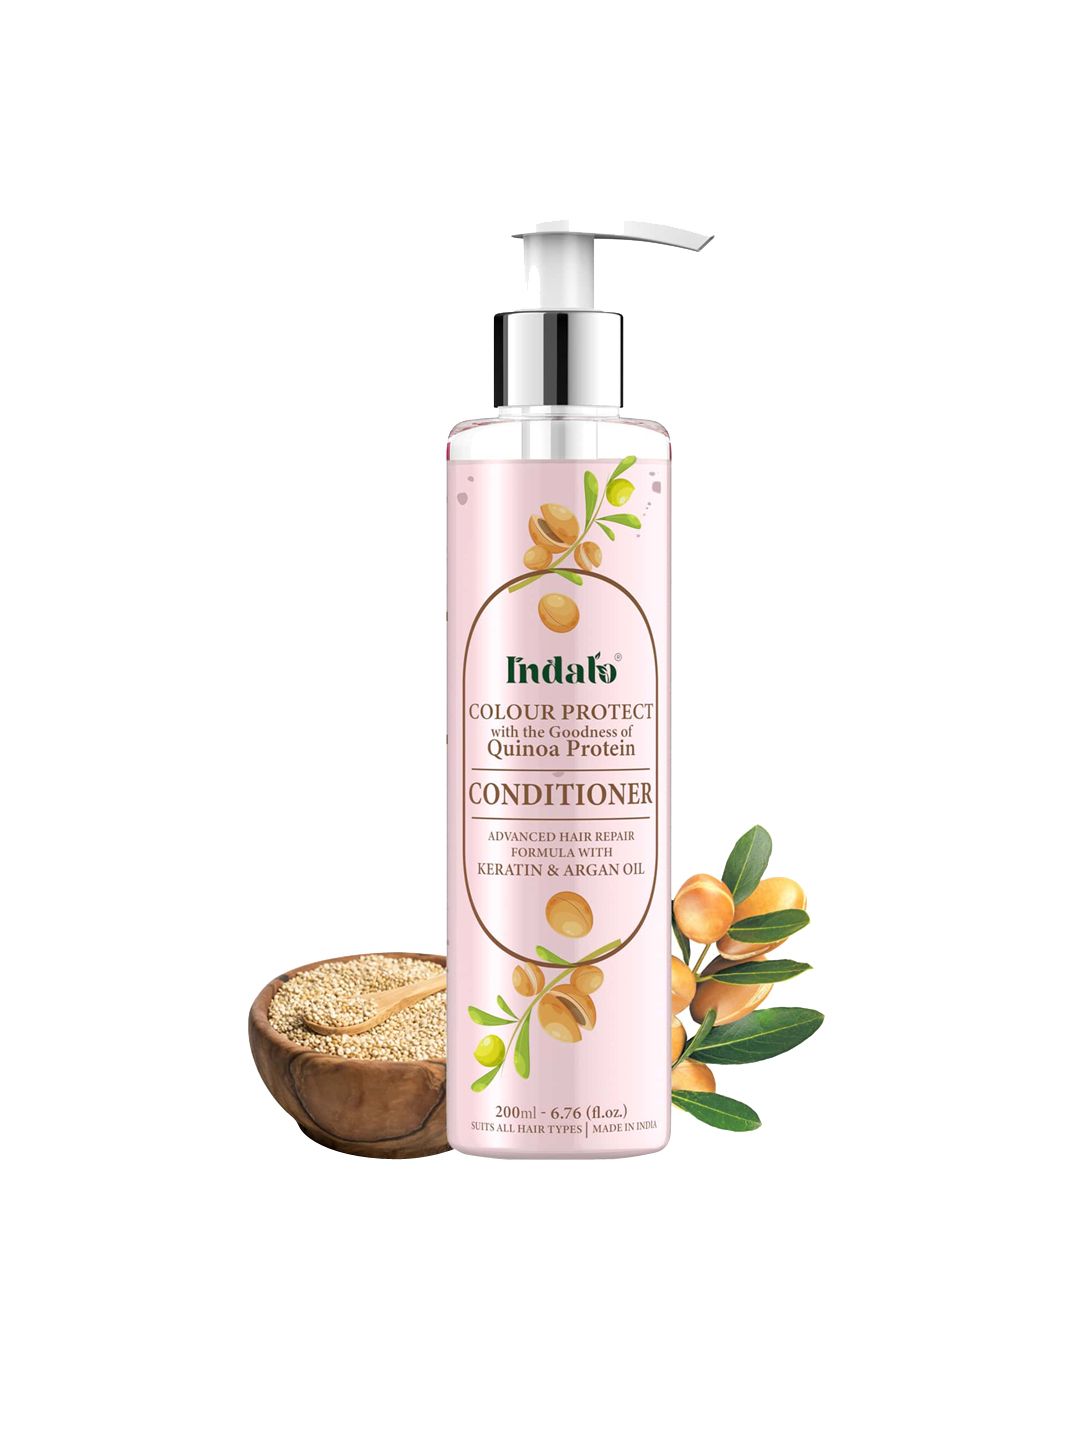 INDALO Quinoa Protein Colour Protect Conditioner for Hair & Damaged Hair Repair - 200 ml Price in India